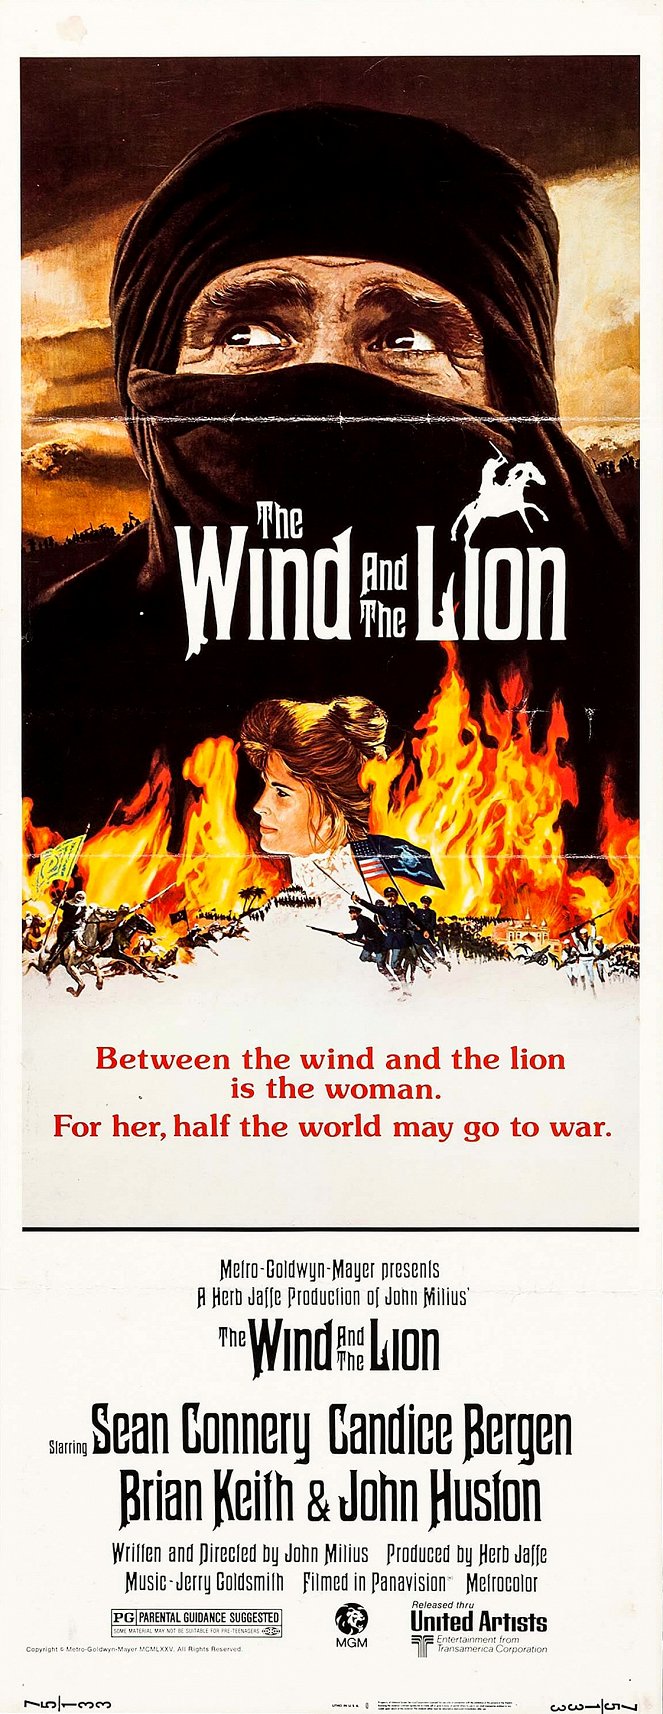 The Wind and the Lion - Julisteet